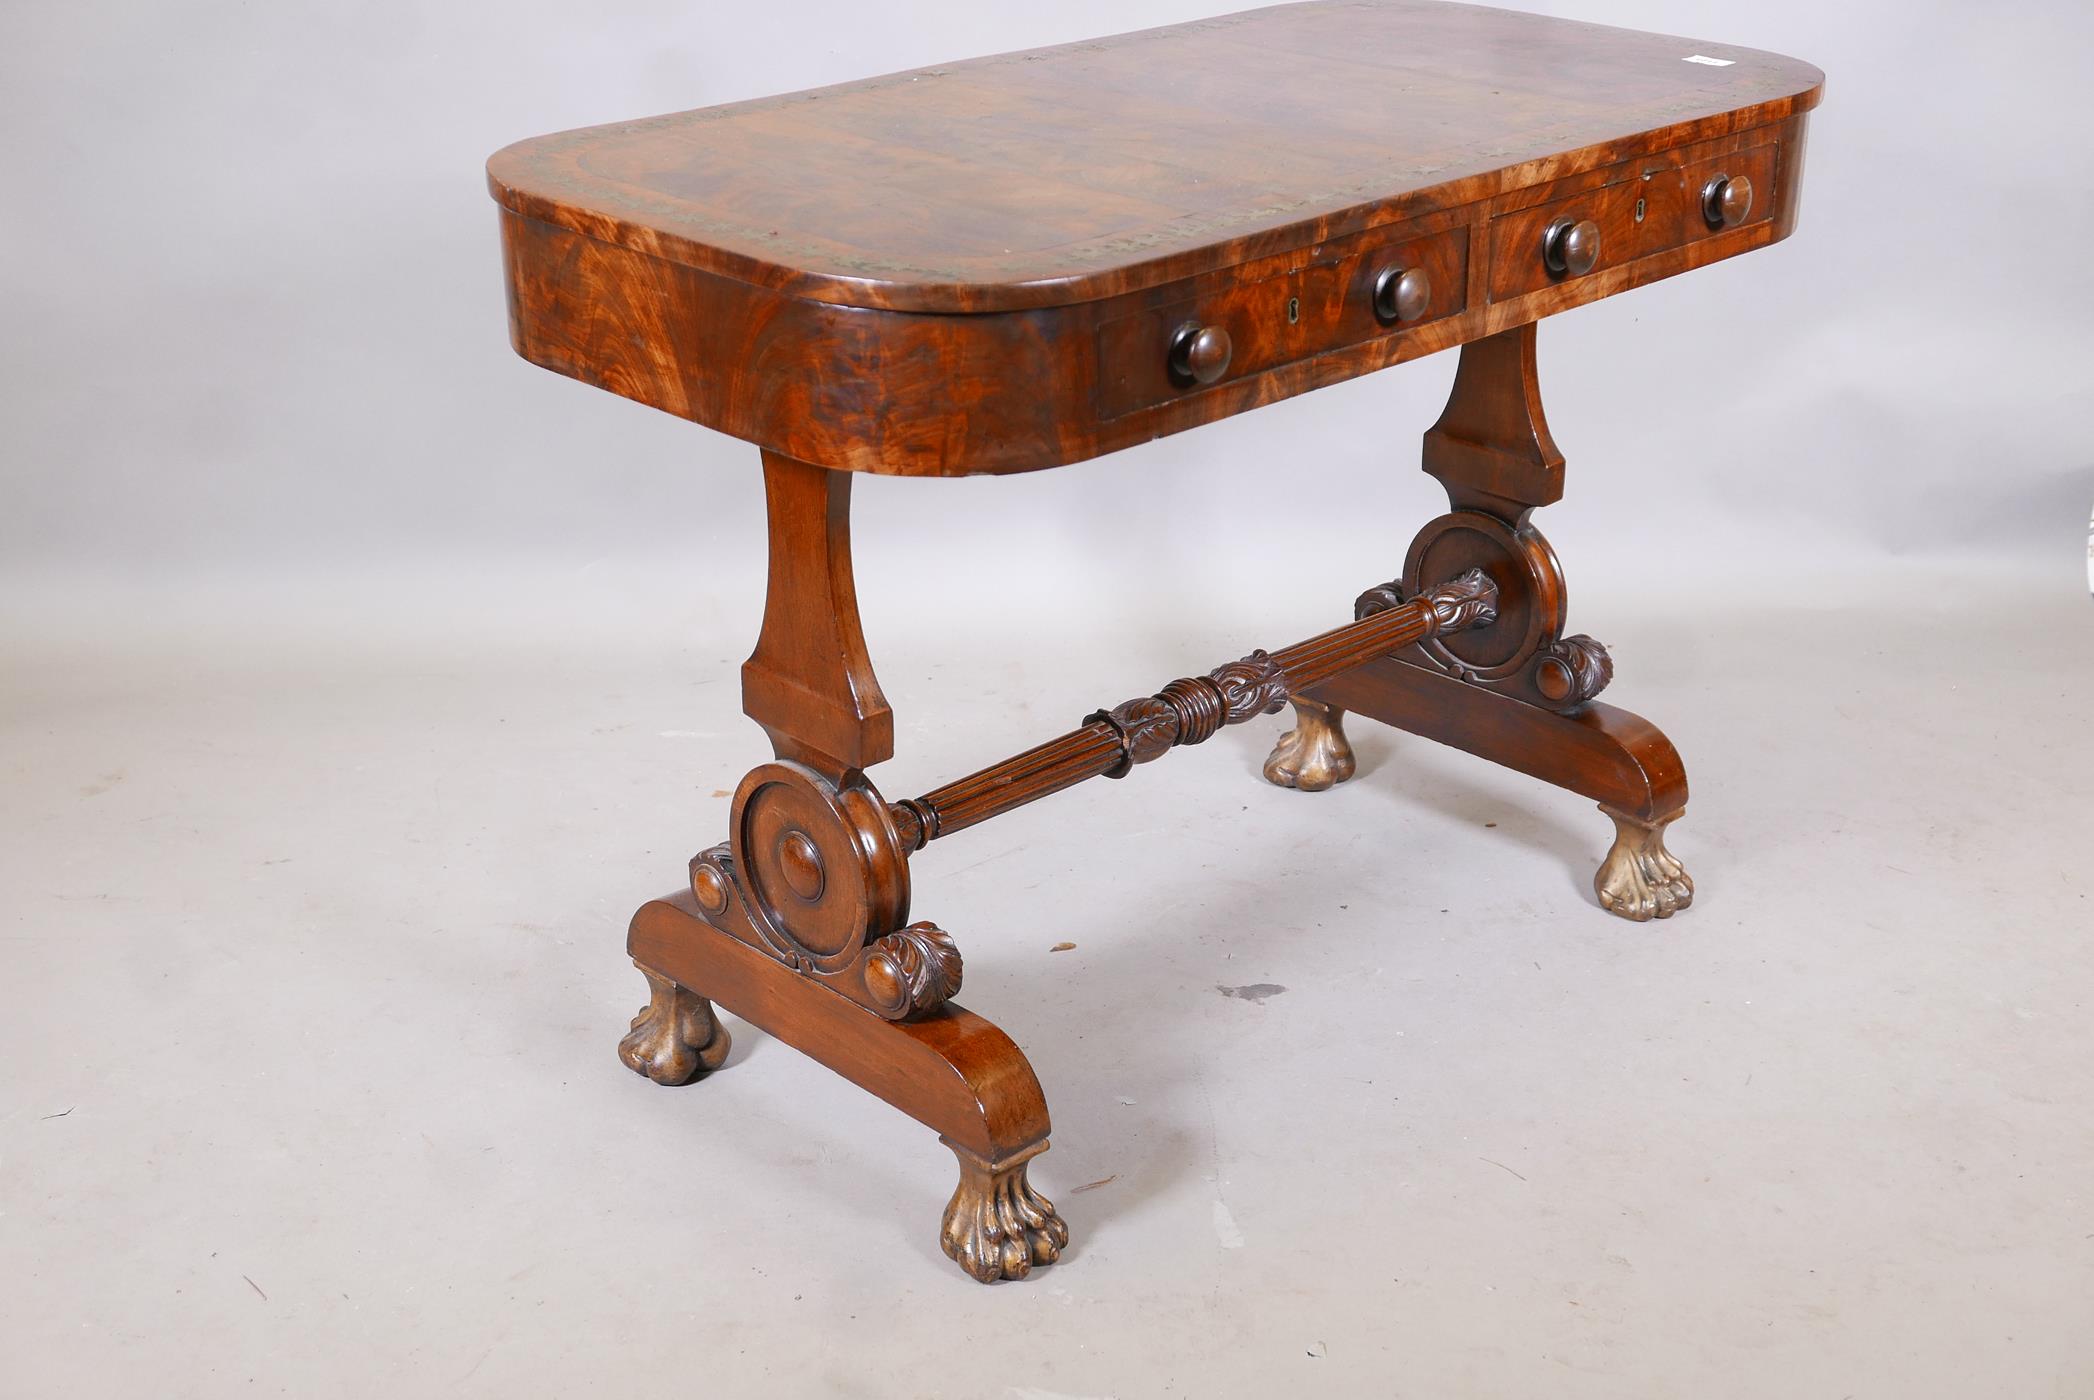 A C19th flame mahogany centre table, with two true and two false drawers, the top with rosewood - Image 4 of 6